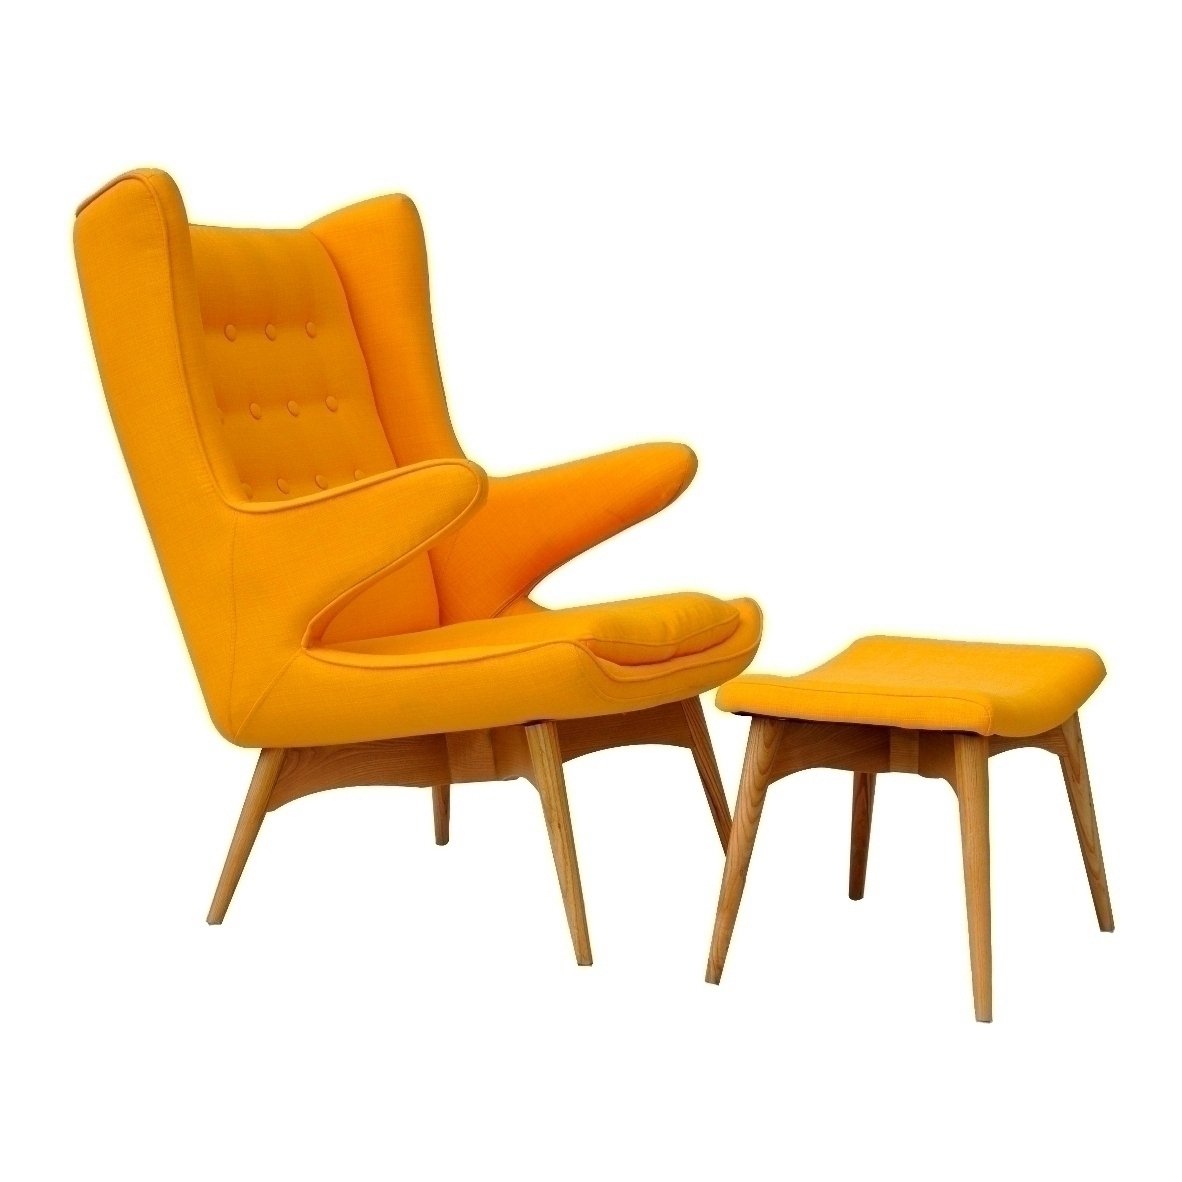 Northport Chair And Ottoman - Yellow Furniture-Living Room-Ottomans & Stools